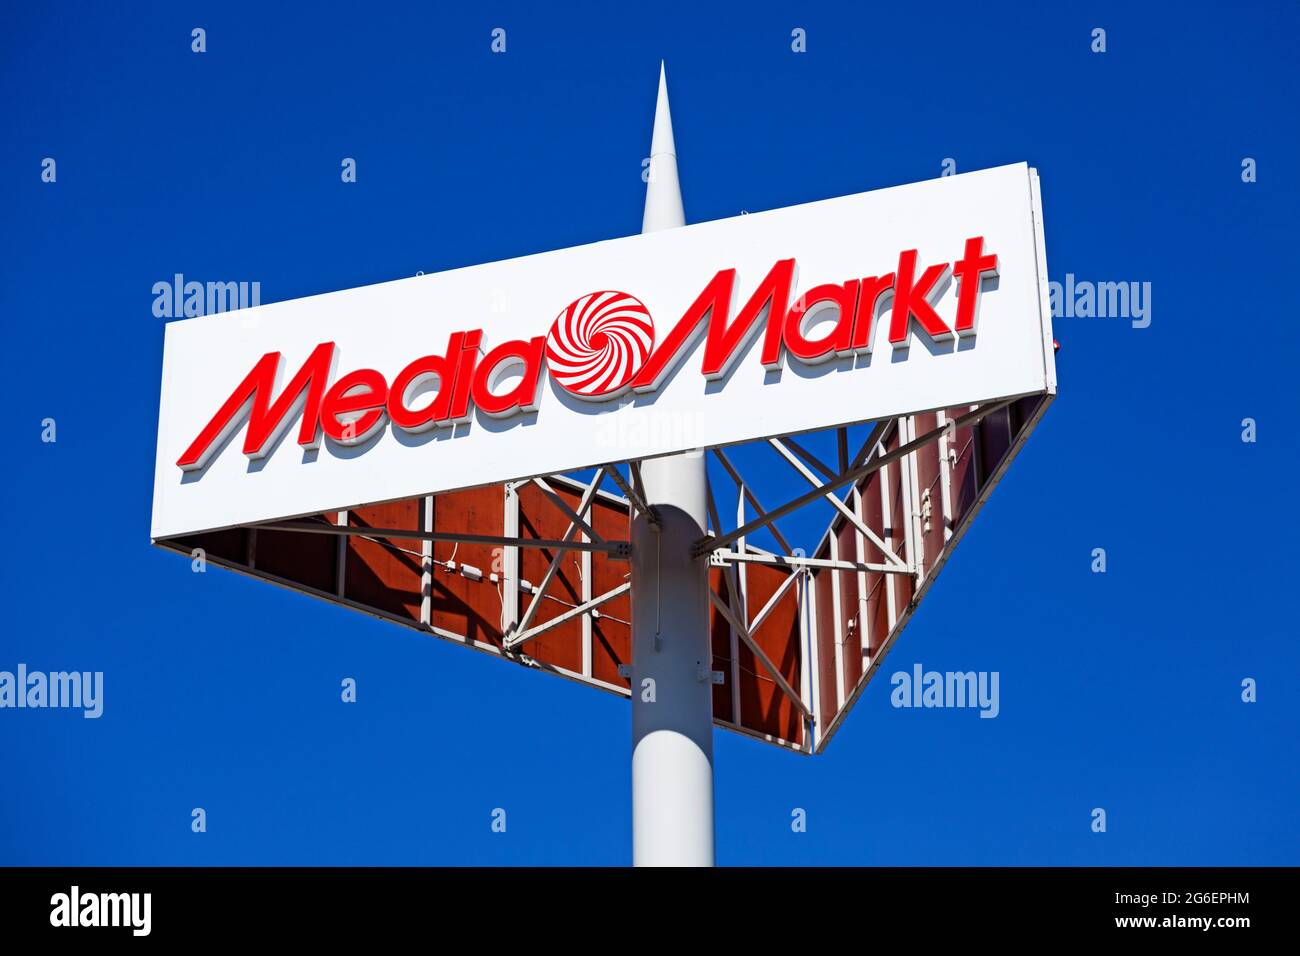 AMSTERDAM, NETHERLANDS - JULY 8, 2017: Media Markt store in Amsterdam. Media  Markt is the largest consumer electronics store chain in Europe Stock Photo  - Alamy